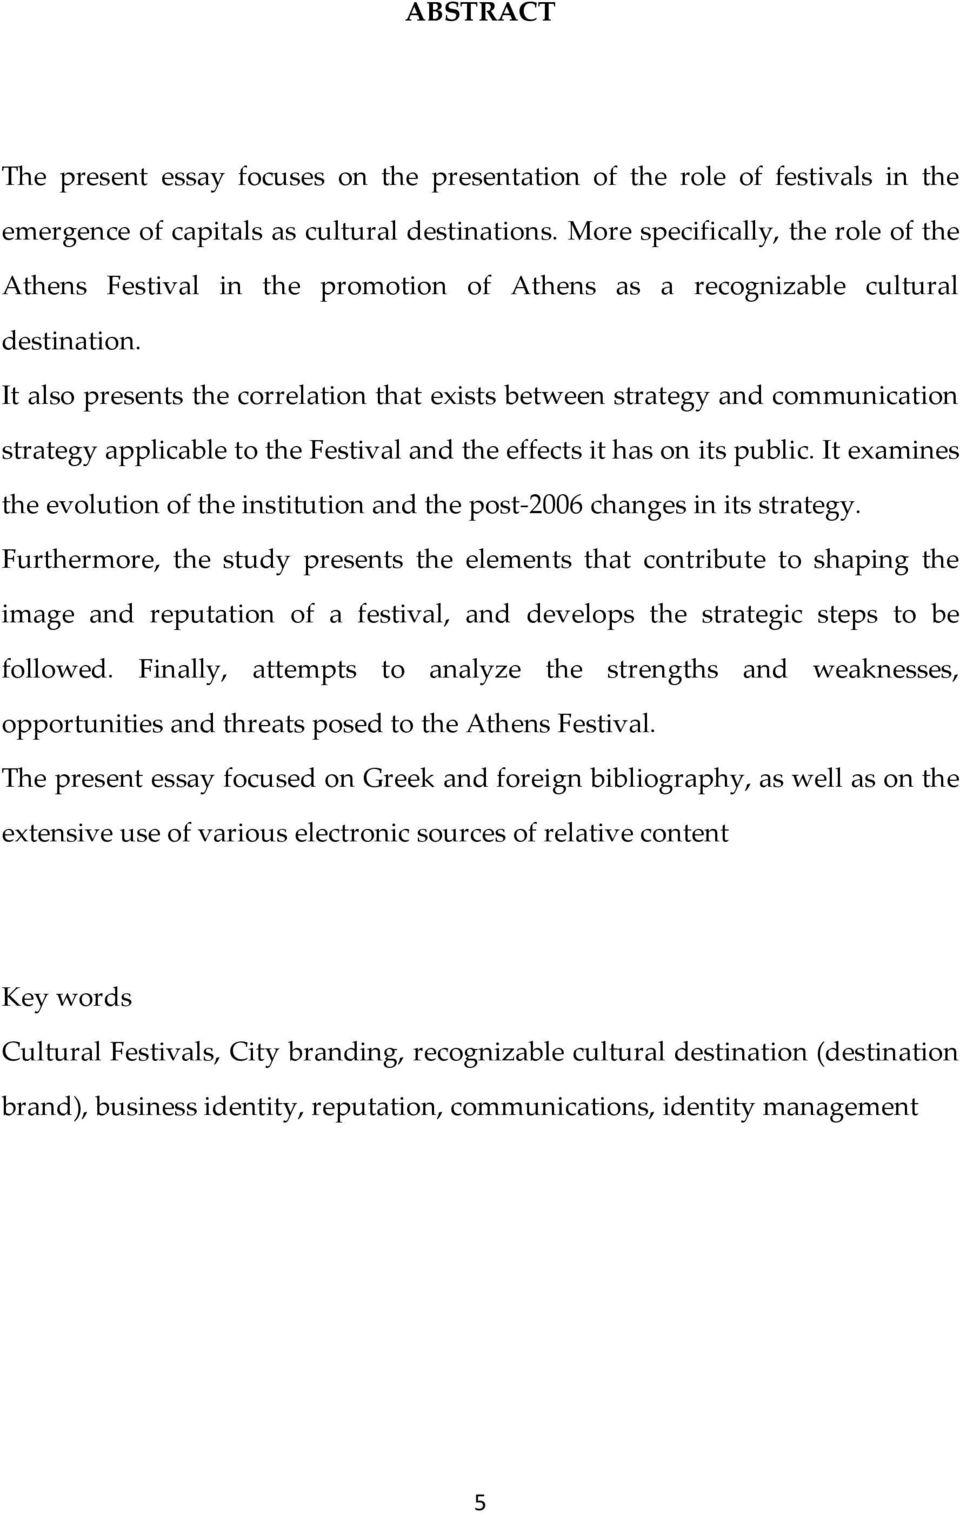 It also presents the correlation that exists between strategy and communication strategy applicable to the Festival and the effects it has on its public.